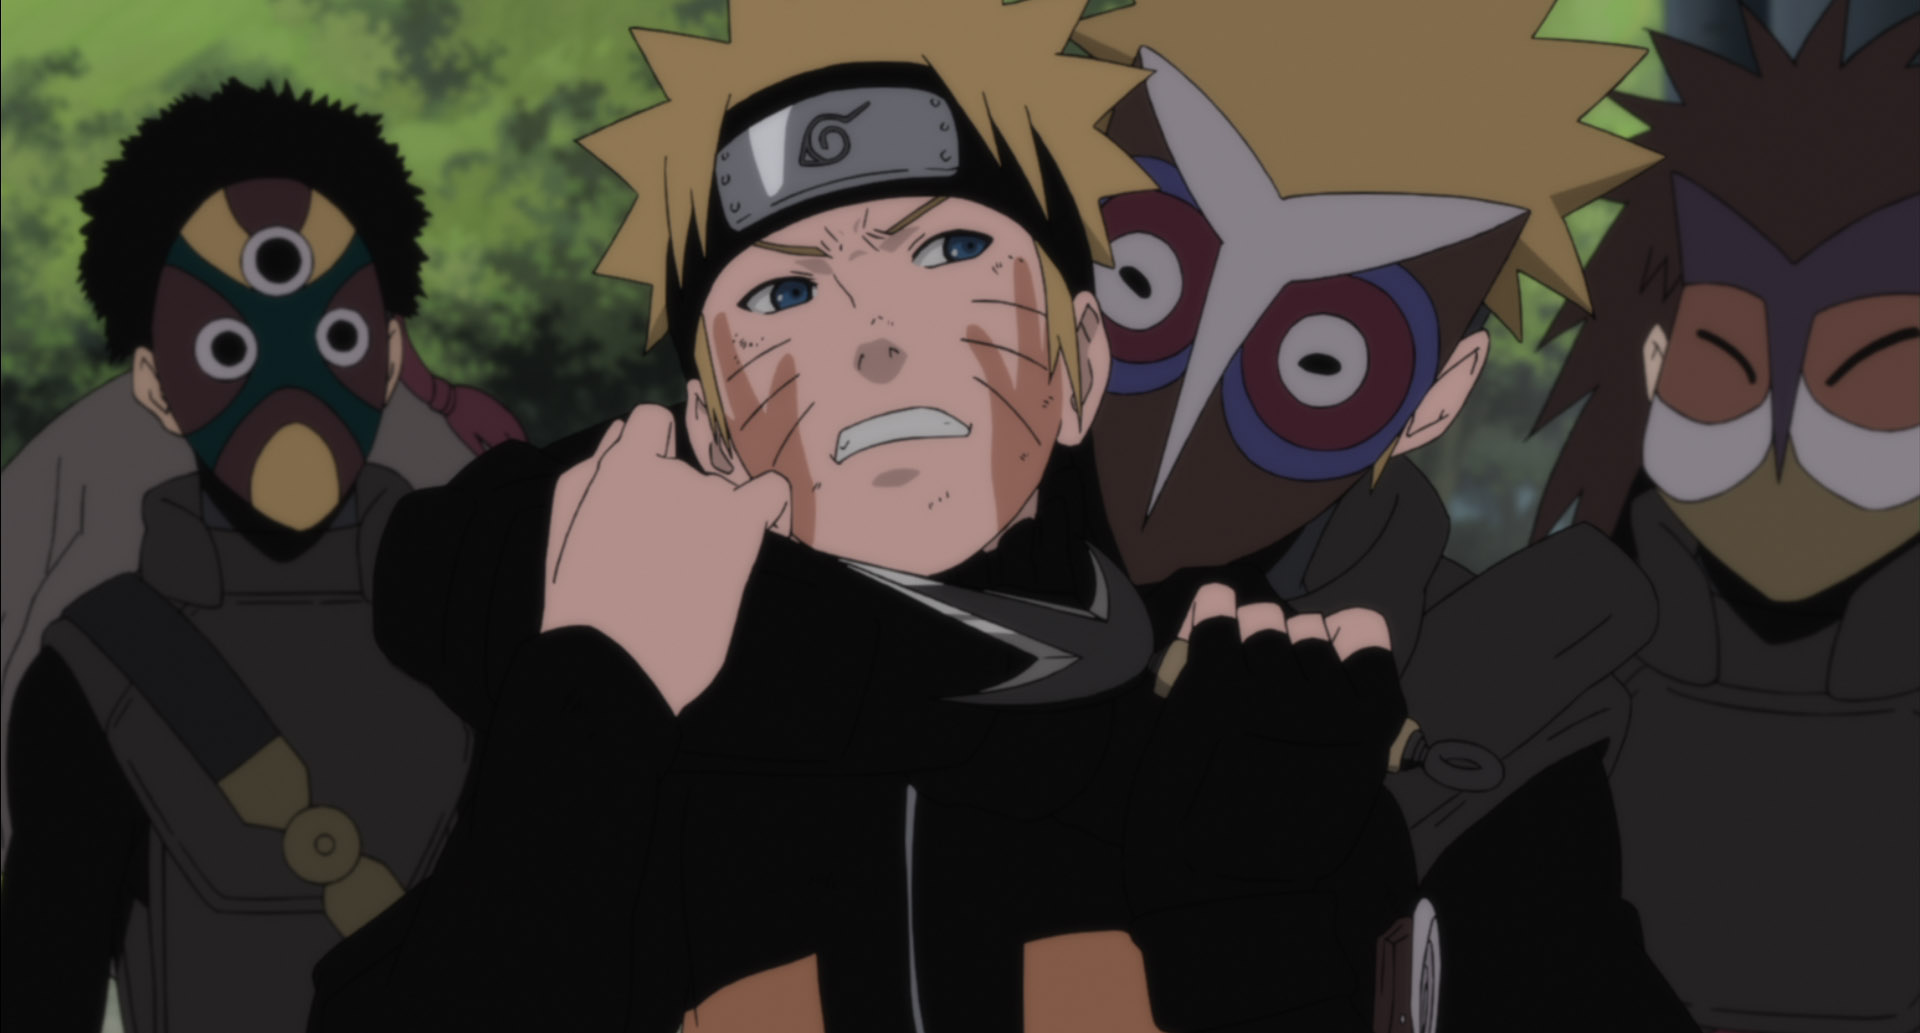 Naruto Shippuden: The Movie 4 – The Lost Tower